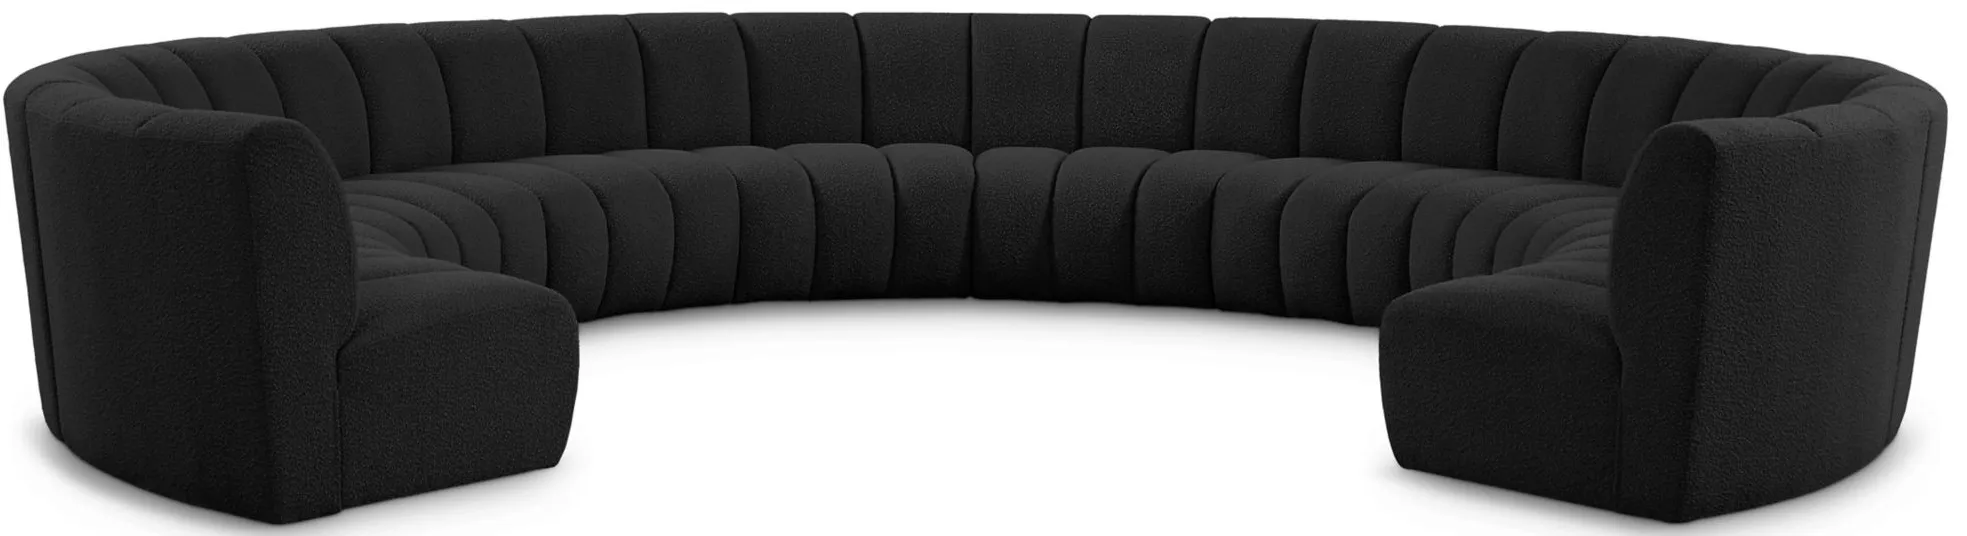 Infinity 10pc. Modular Sectional in Black by Meridian Furniture